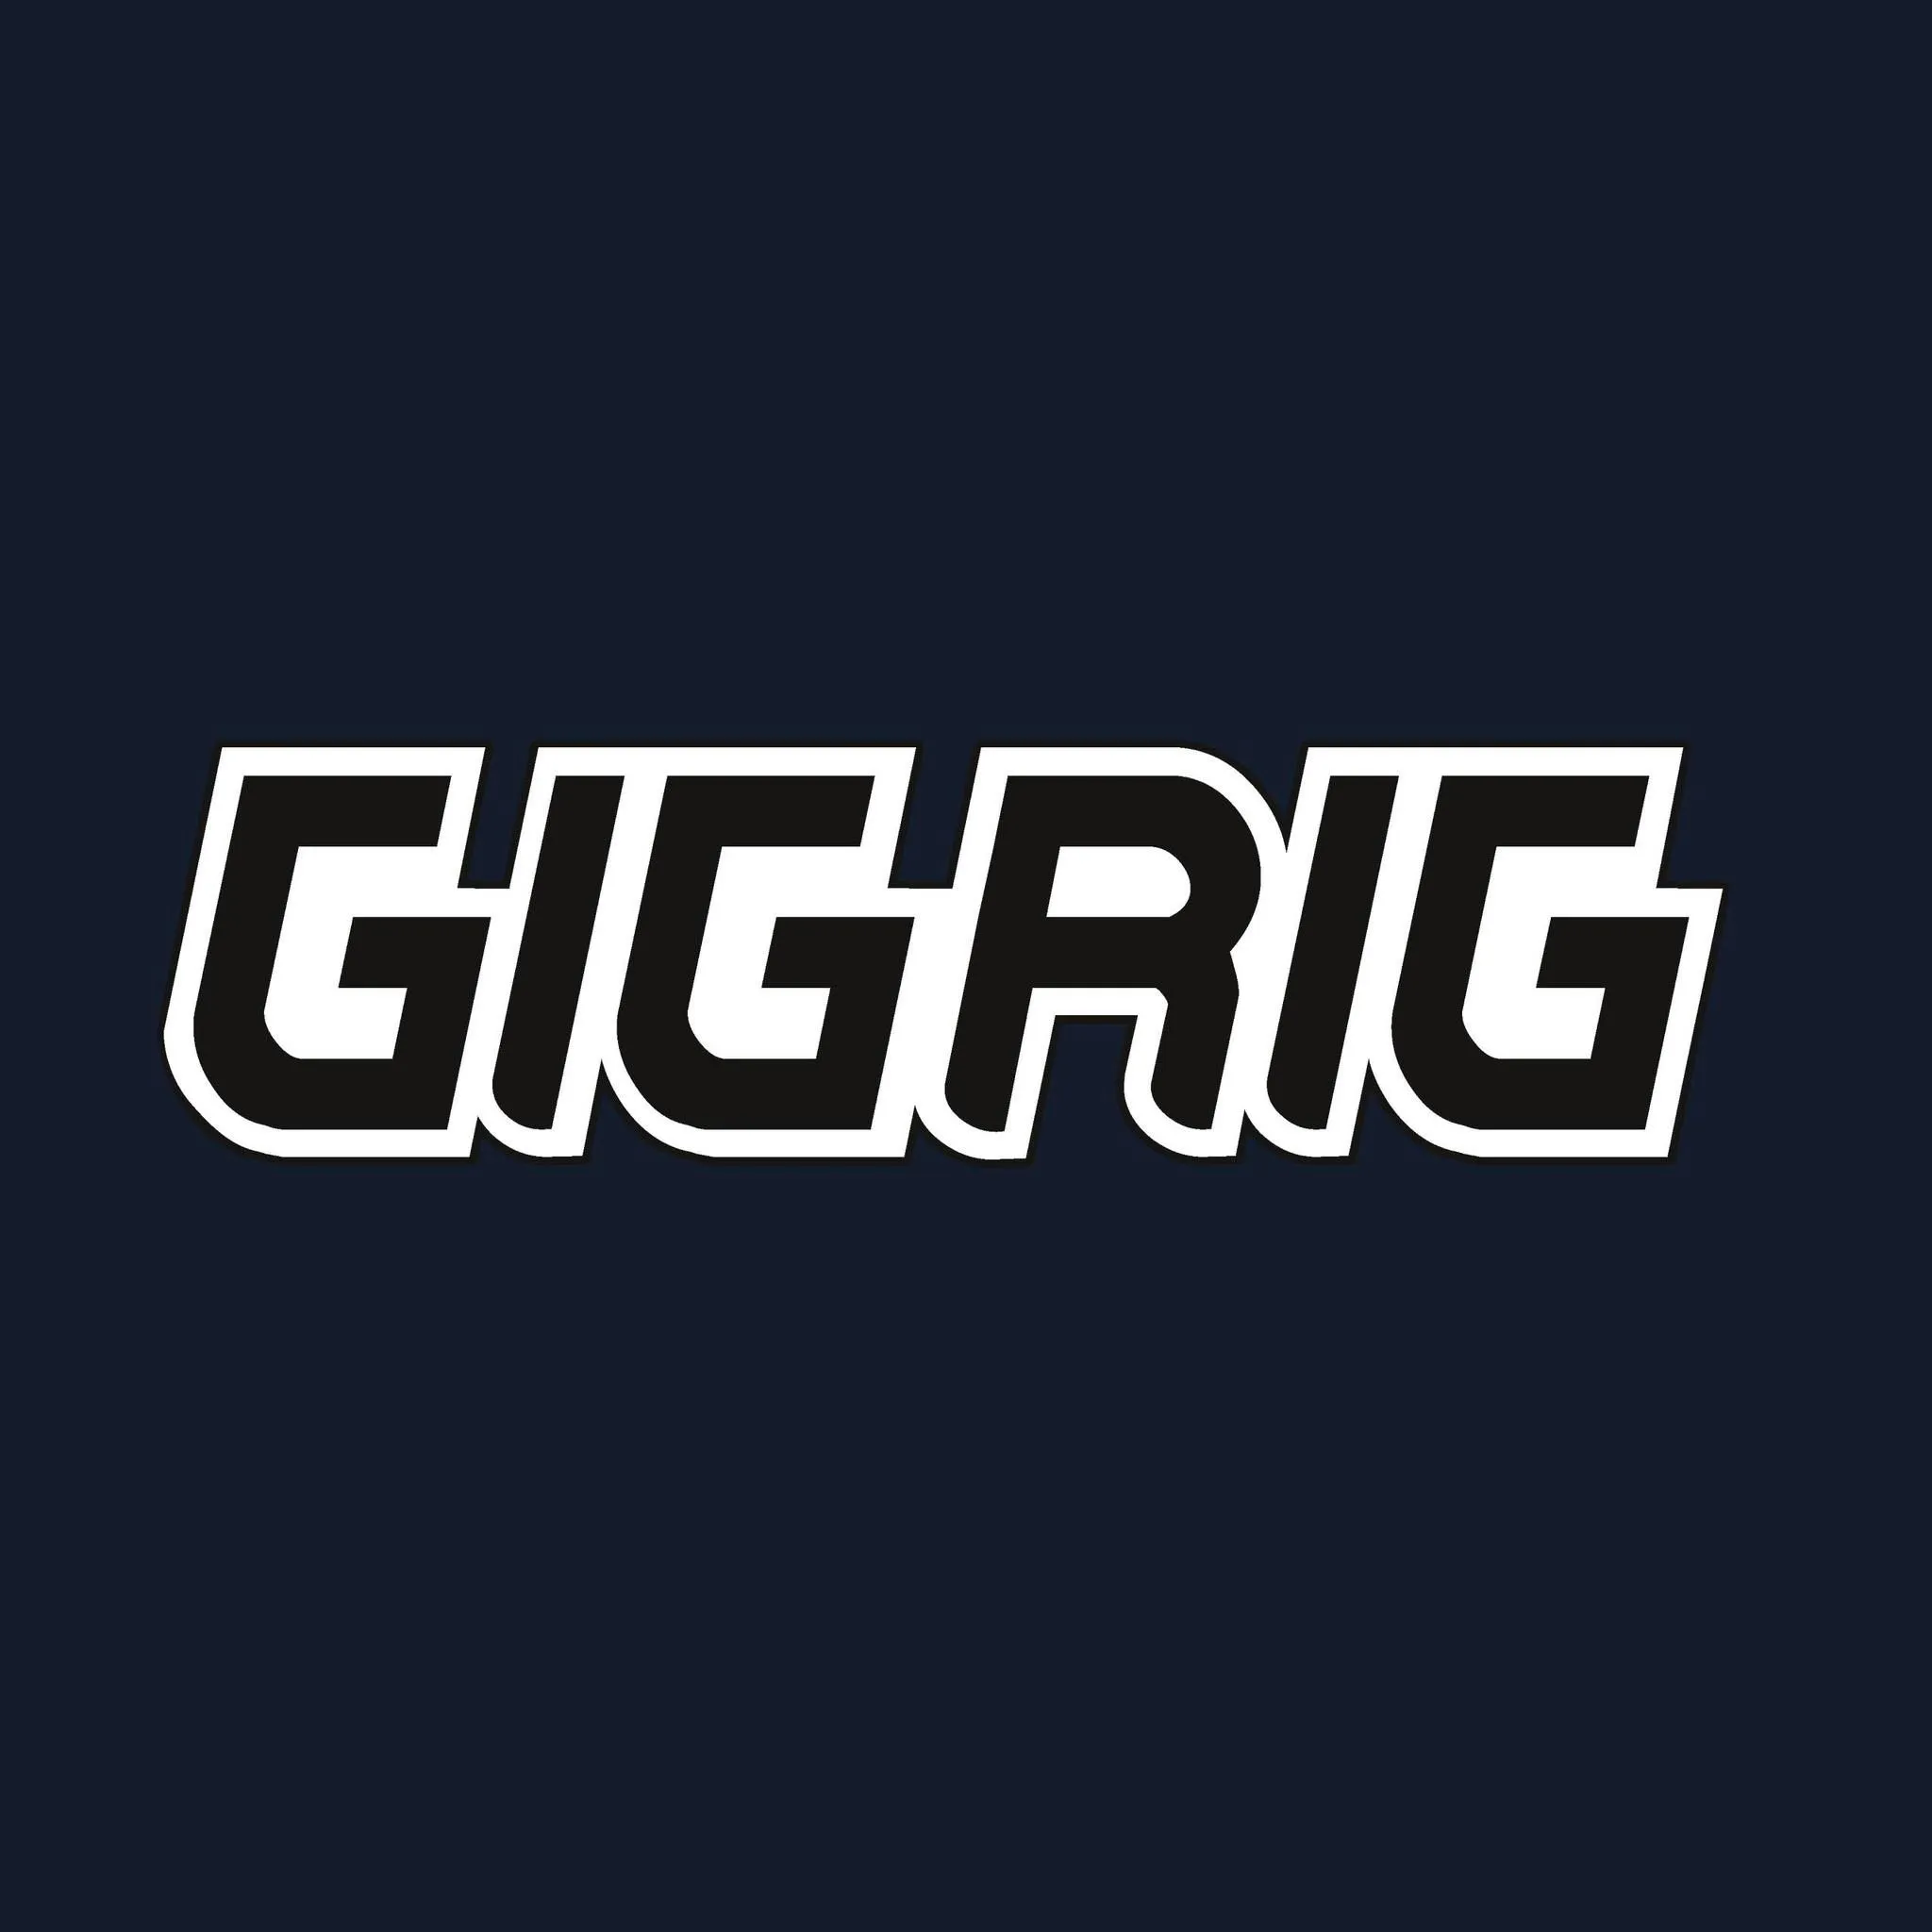 Now Is The Time To Get Gigrig Pro Audio Gear At 10% Discount